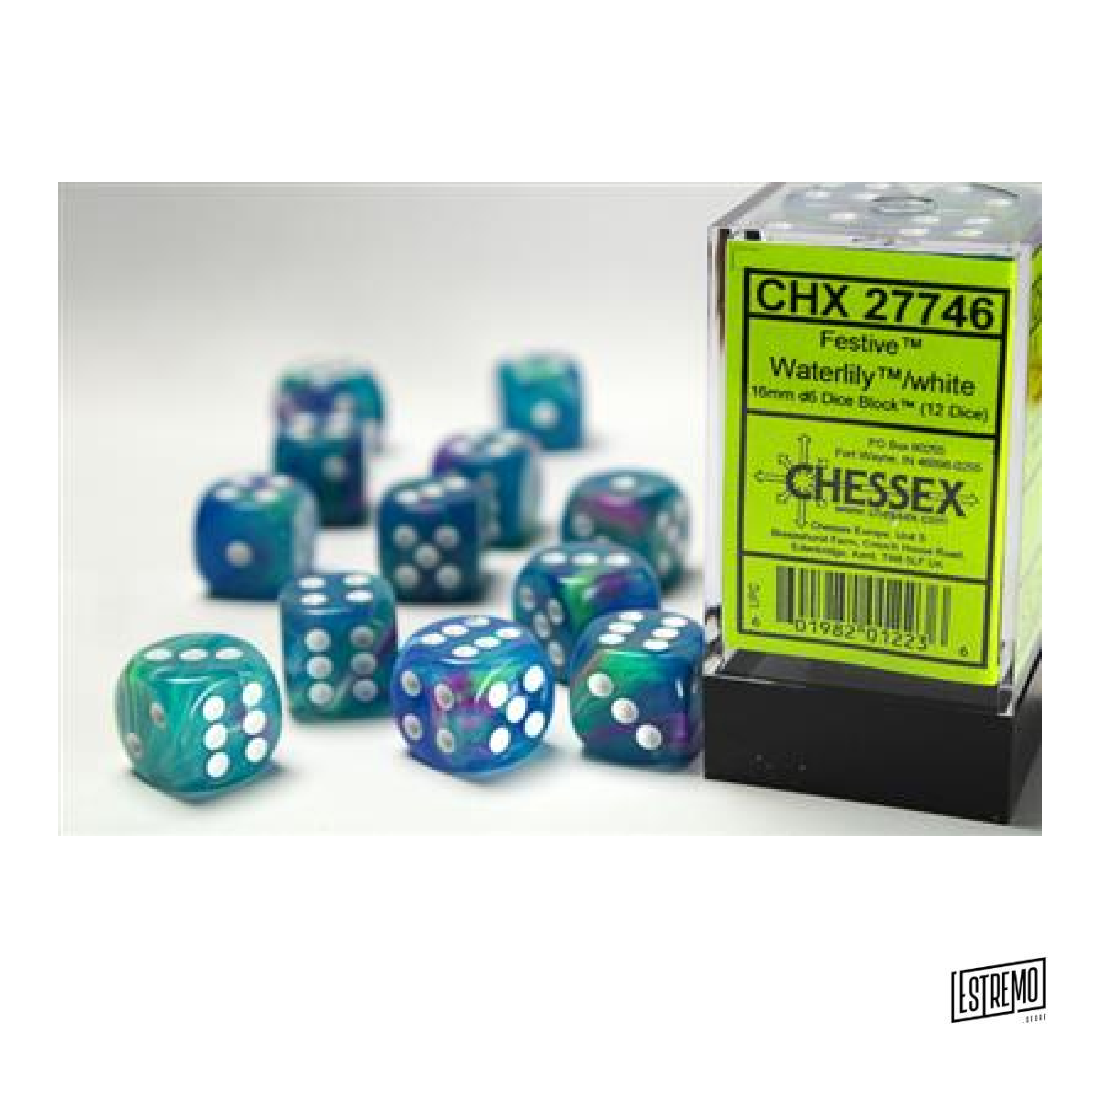 CHESSEX 16MM D6 WITH PIPS DICE BLOCKS (12 DICE) - FESTIVE WATERLILY/WHITE